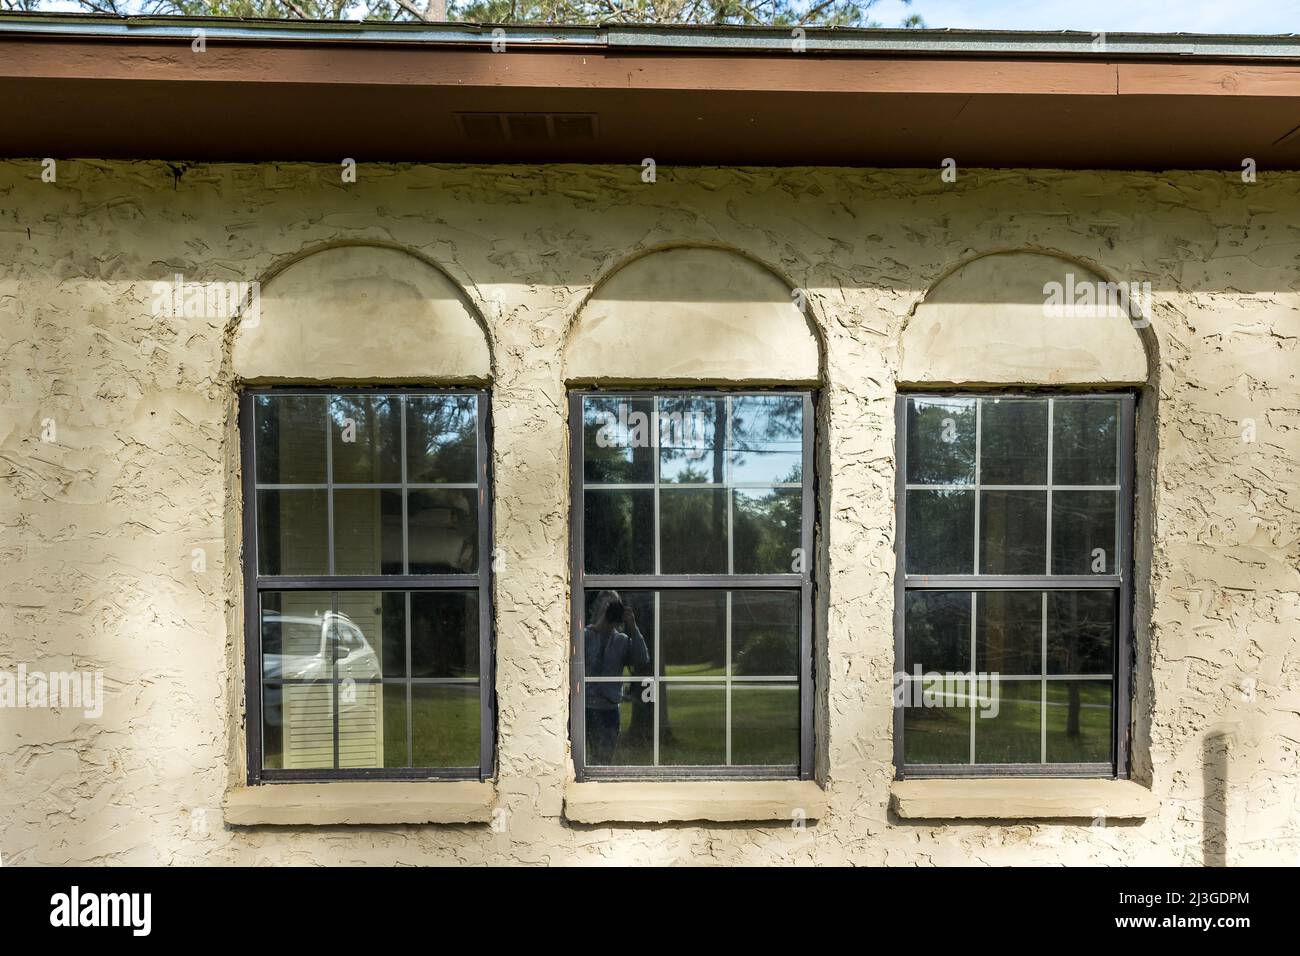 The side view of a brown 1970's ranch style spanish style villa stucco cinder block home with architectural arches and black aluminium original Stock Photo